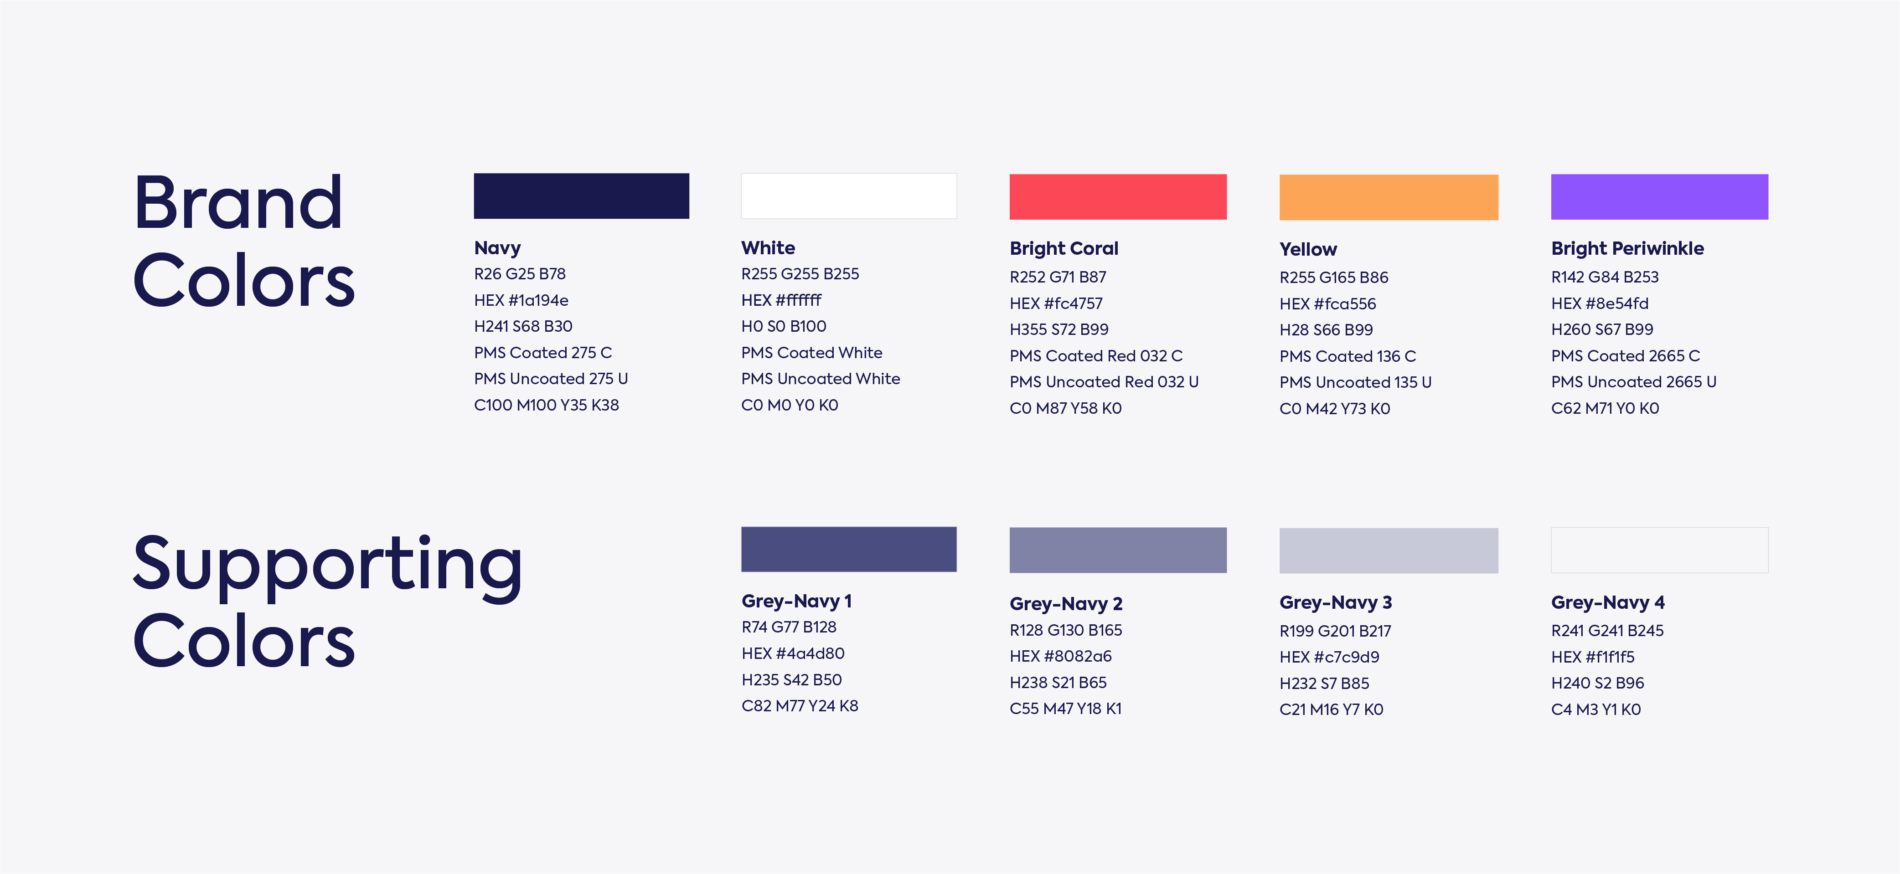 Primary brand color palette and supporting colors displaying color swatches and values